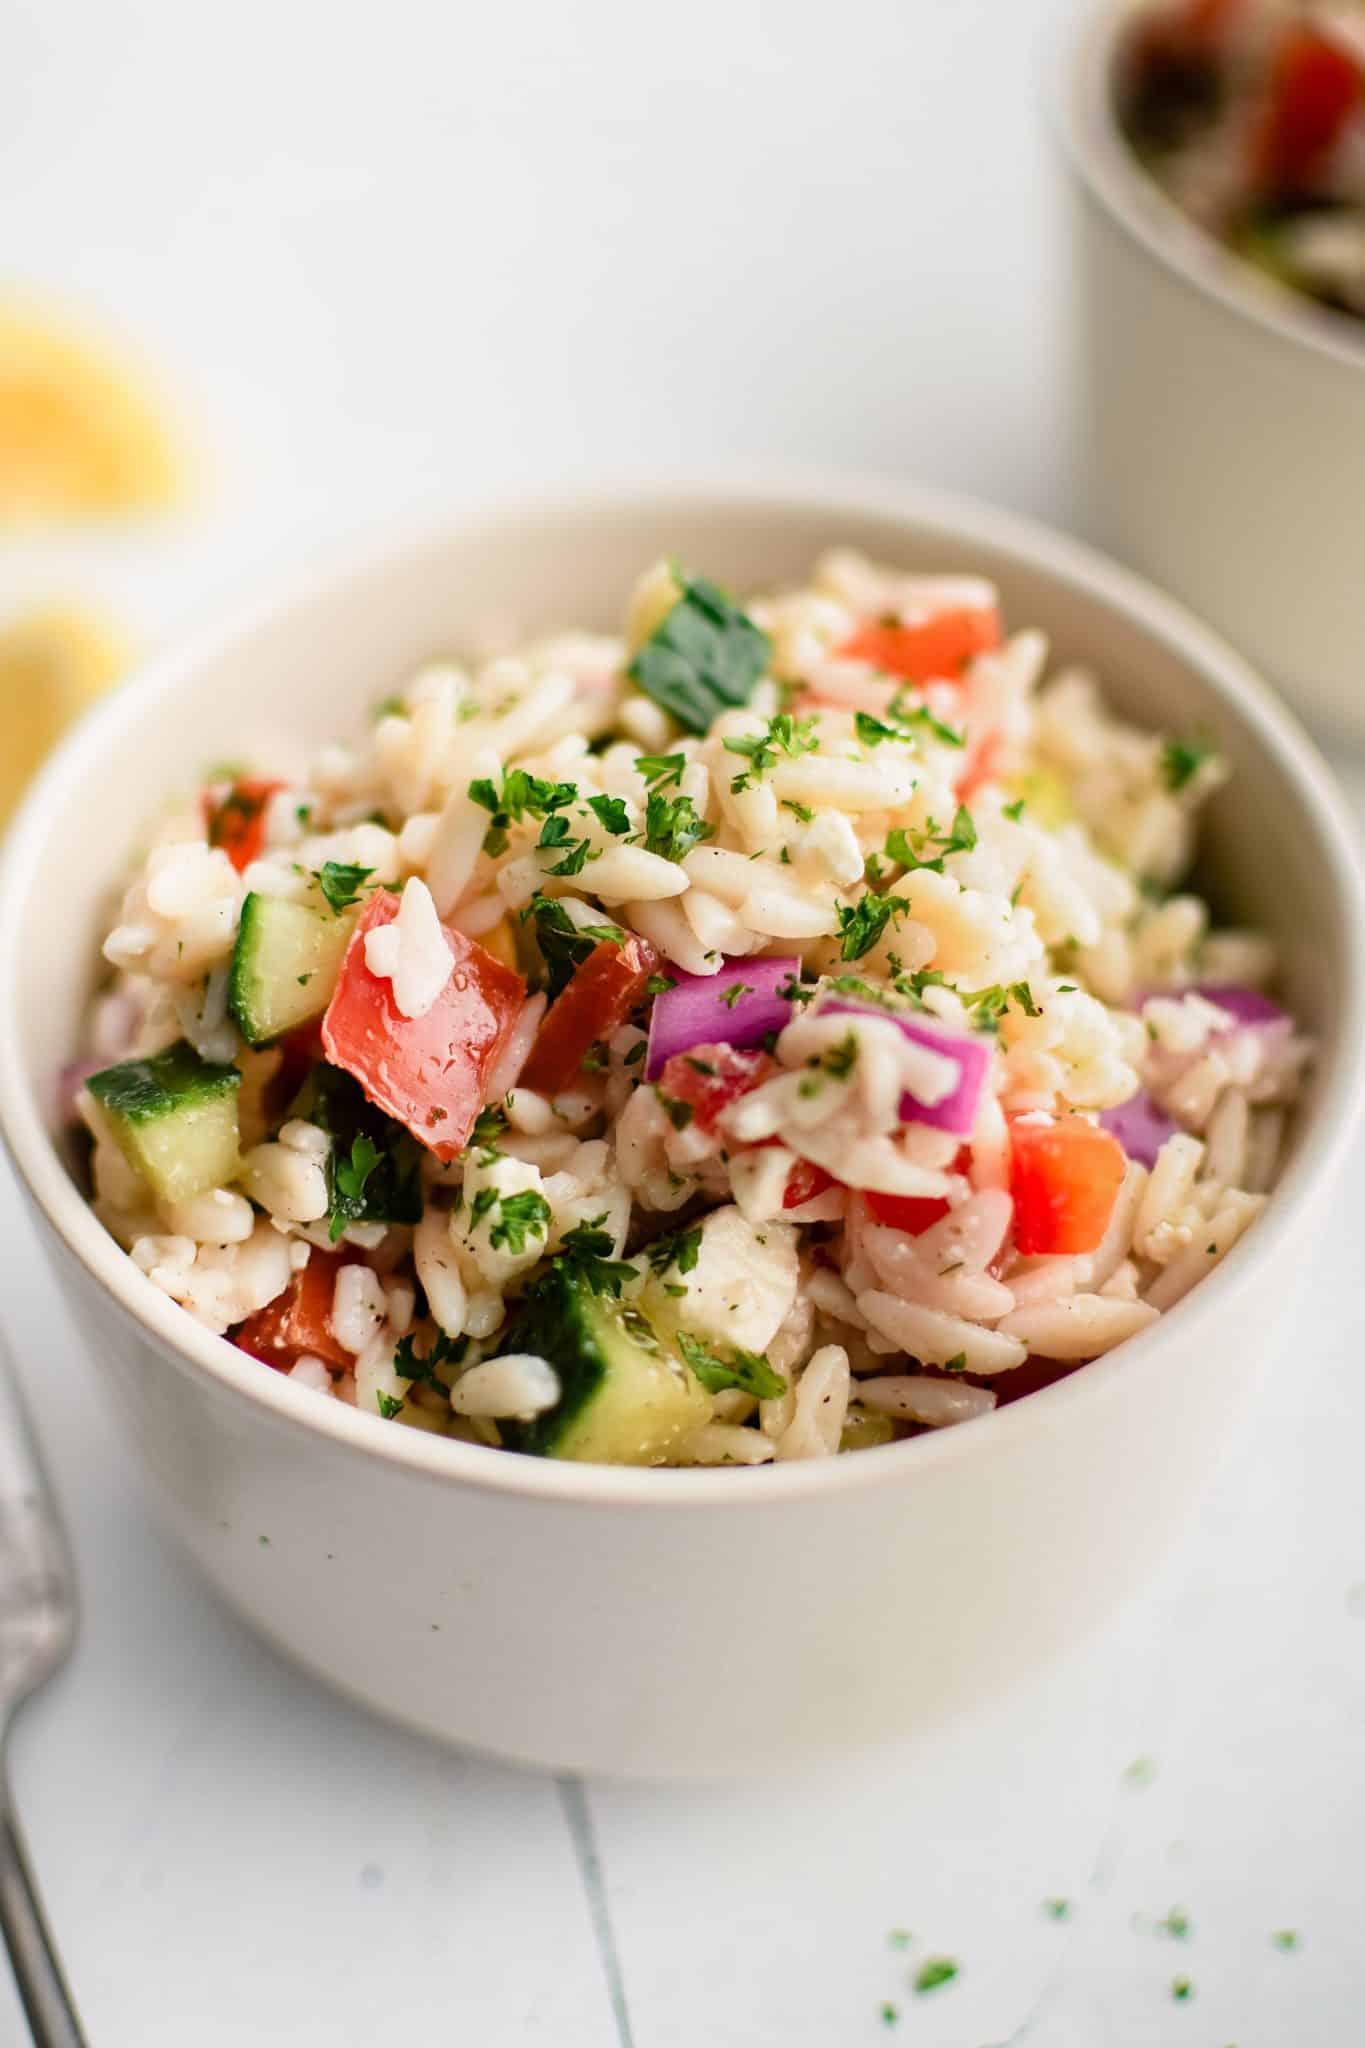 Small serving bowl filled with Mediterranean orzo salad made with cooked orzo, red onion, bell pepper, cucumber, and tomatoes in a lemon vinaigrette.